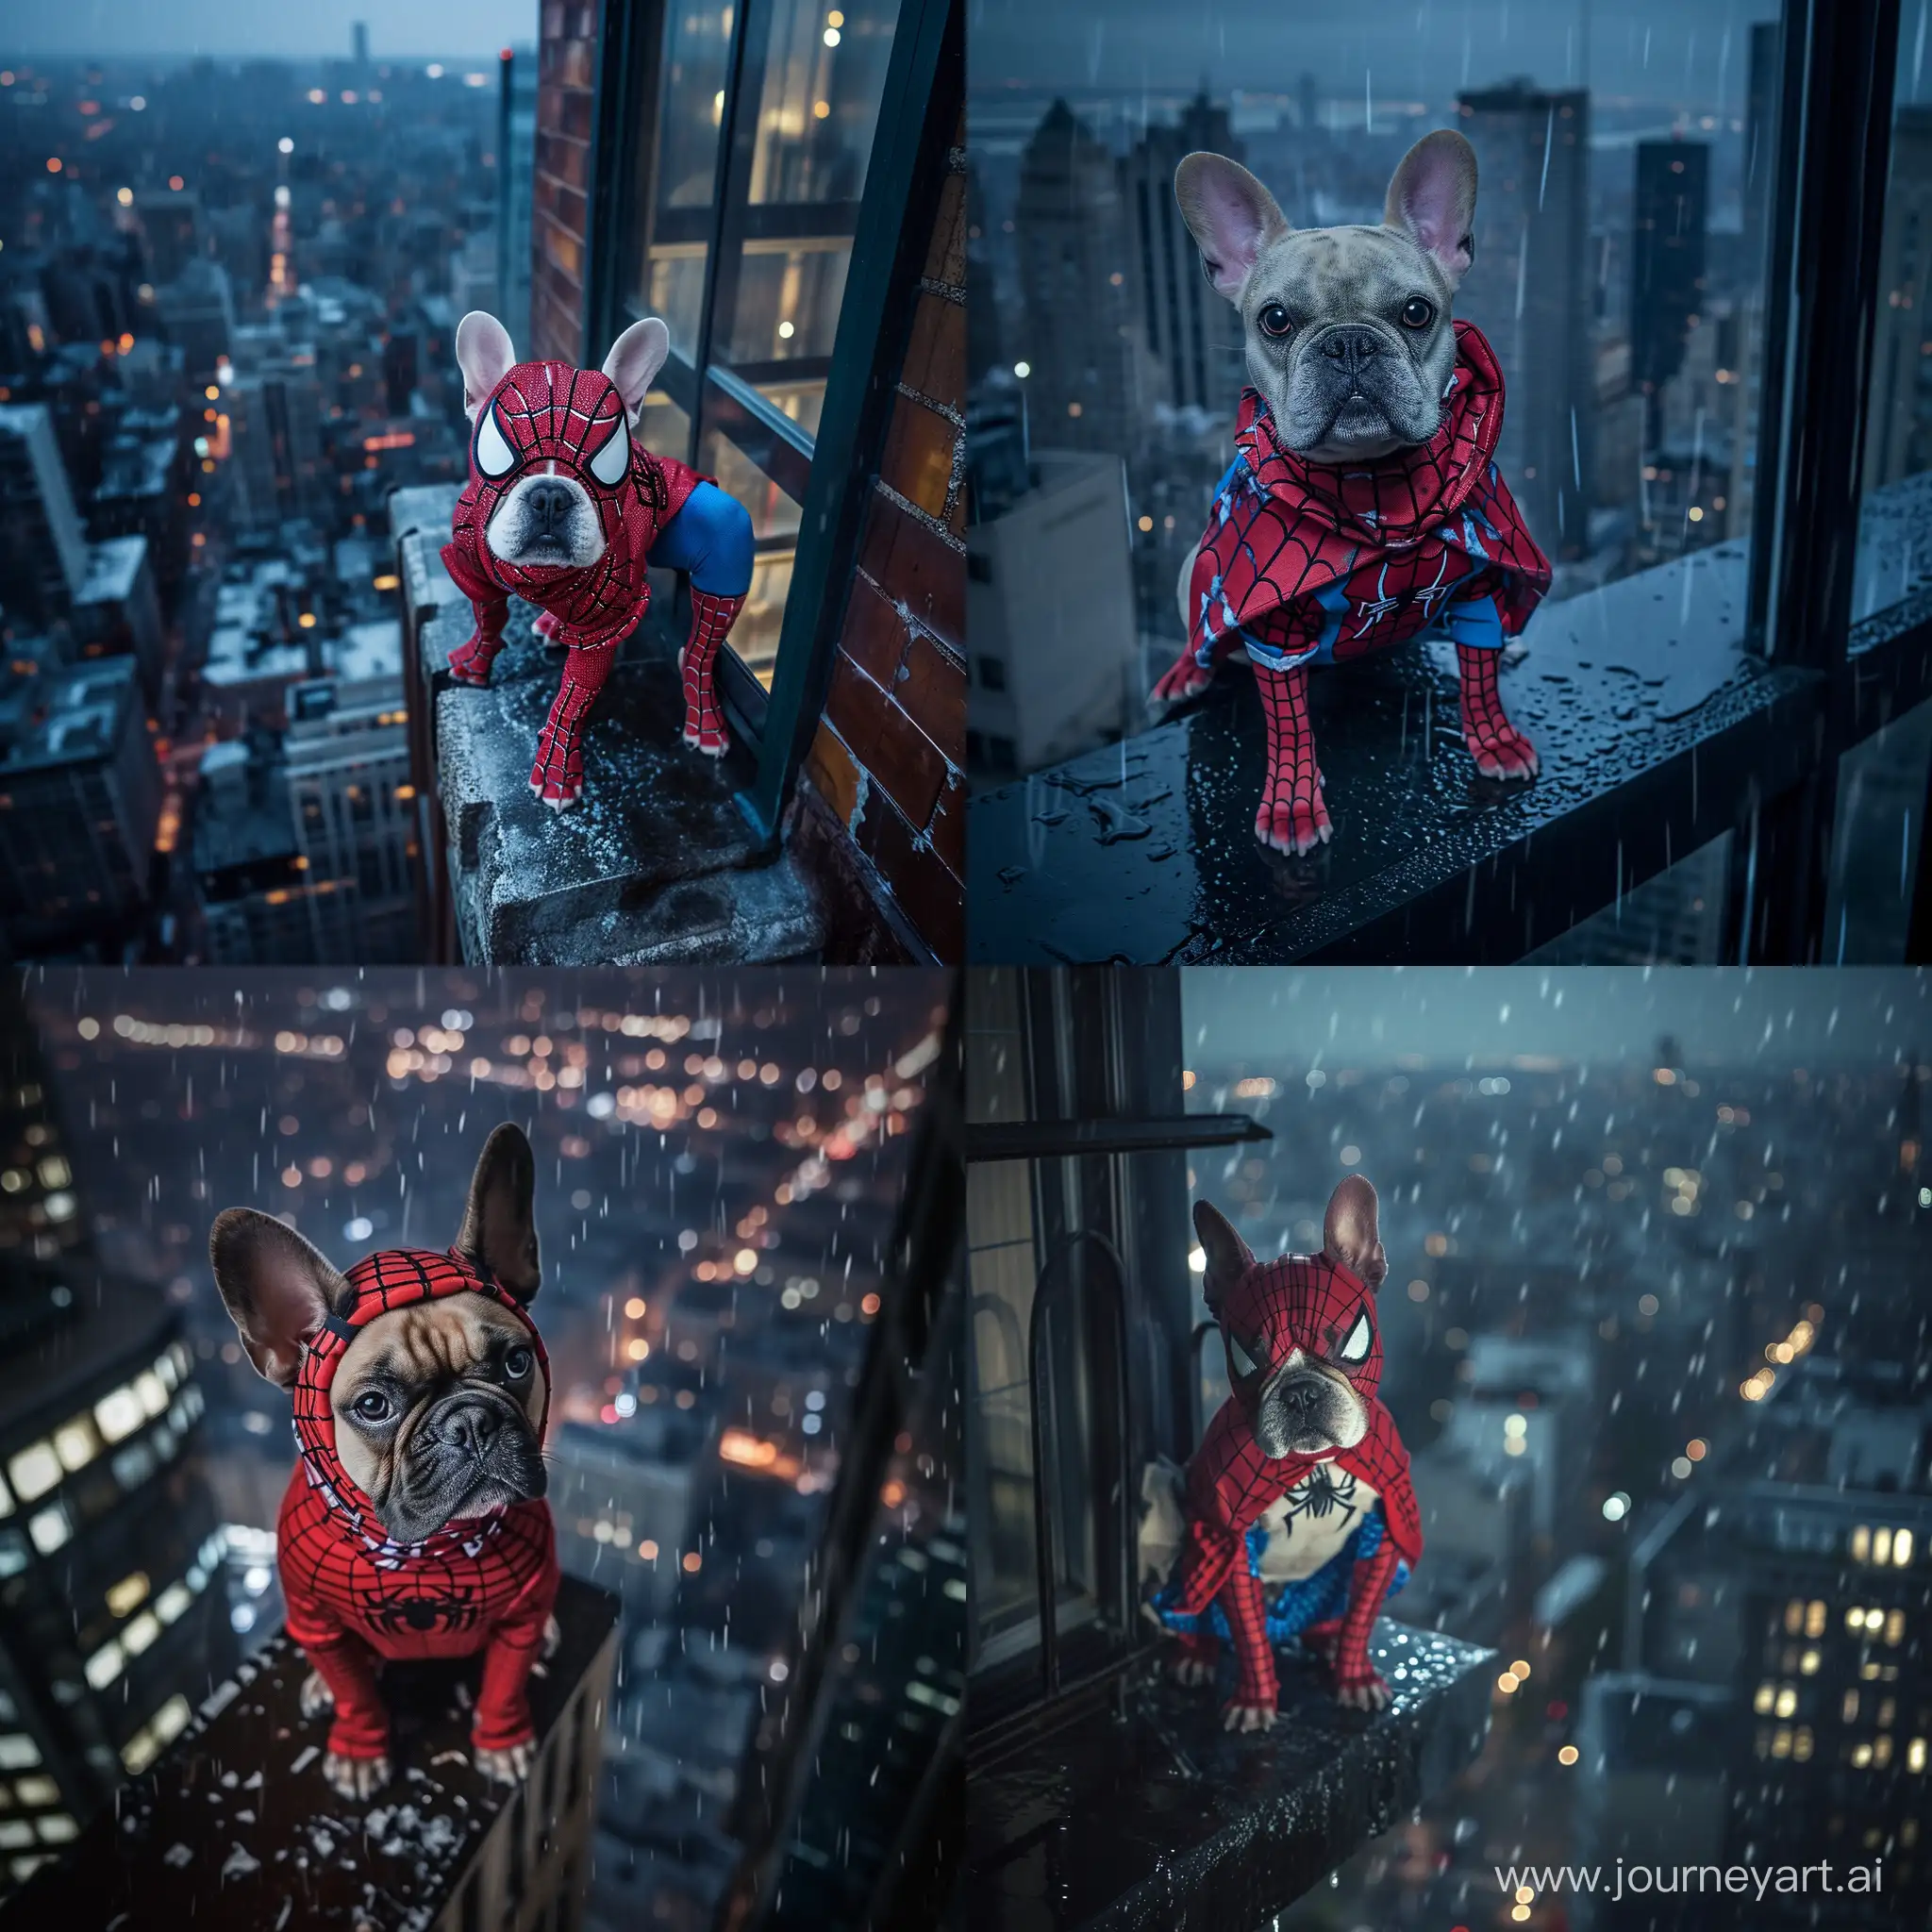 Pied-French-Bulldog-Dressed-as-Spiderman-in-Rainy-Night